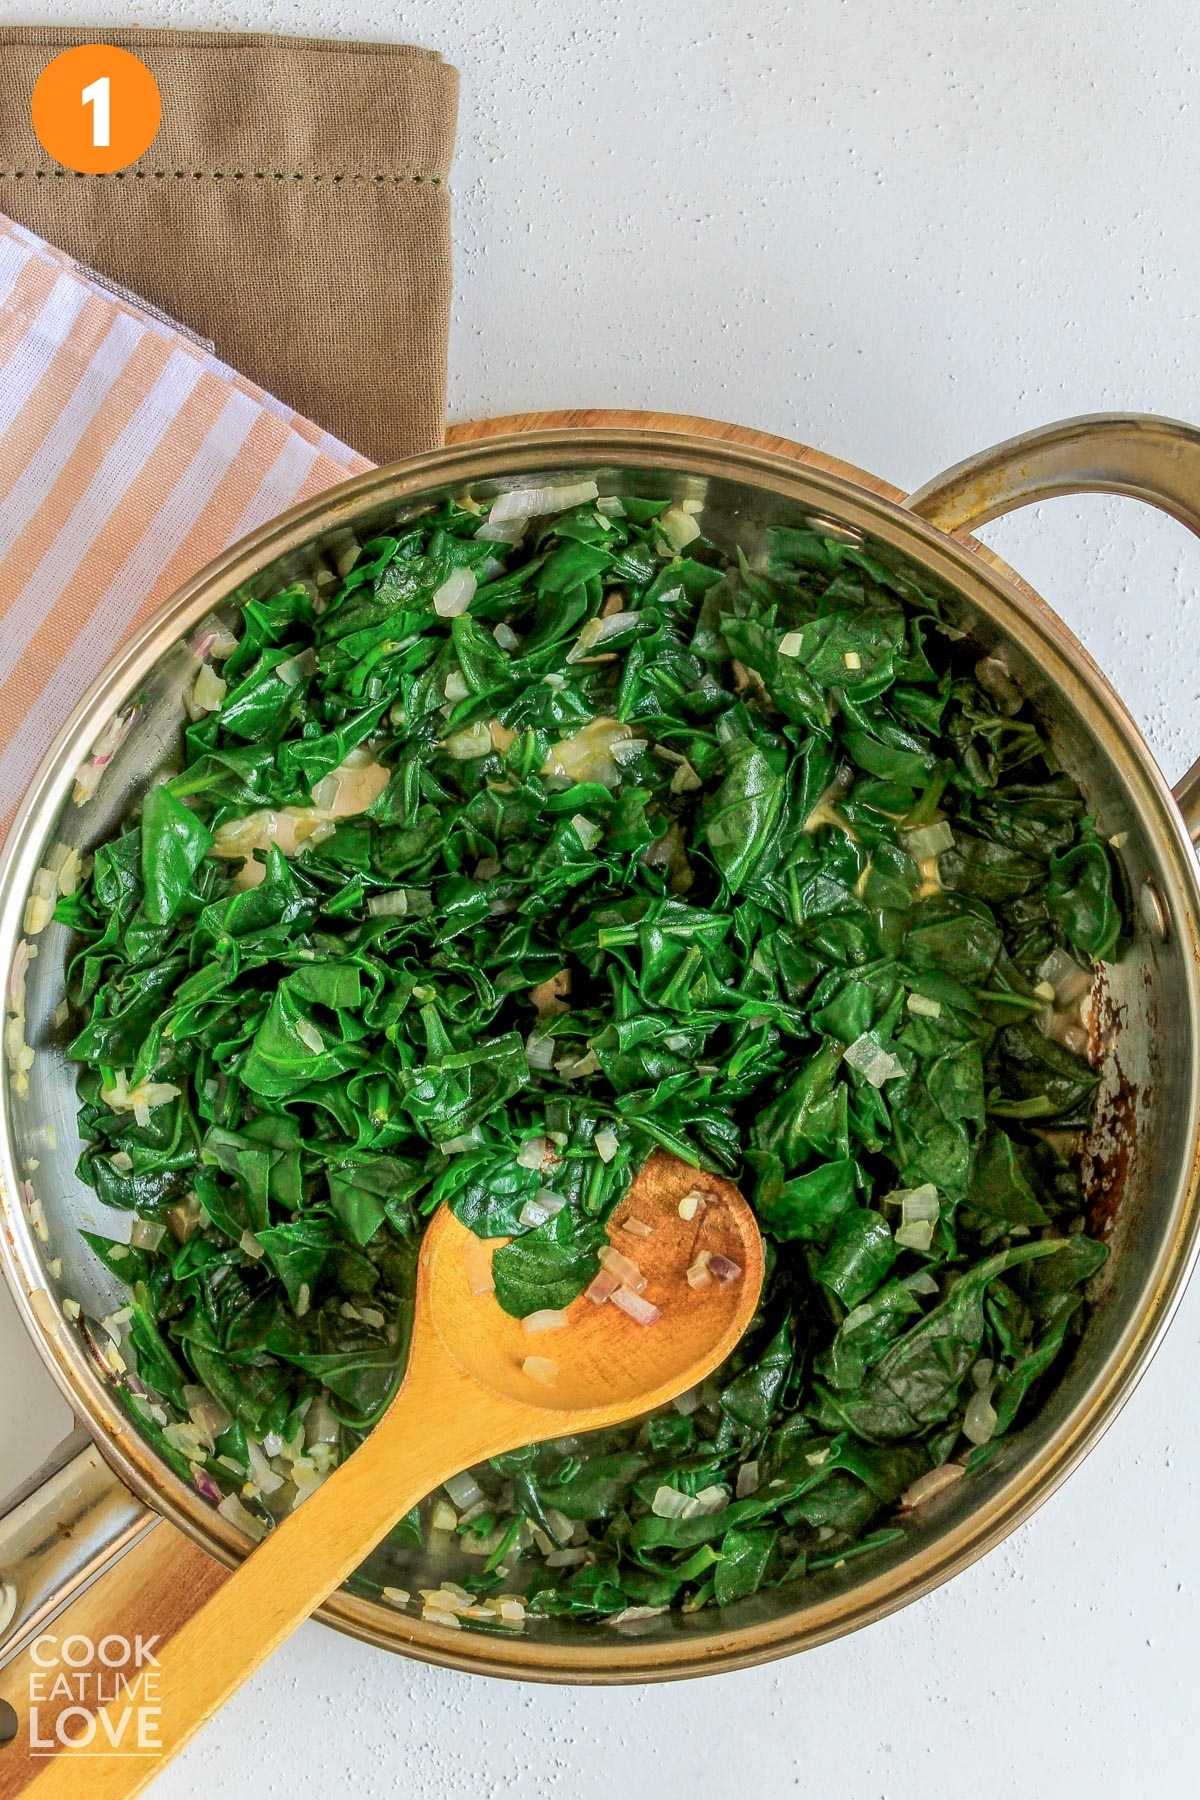 Pan of cooked spinach on table.